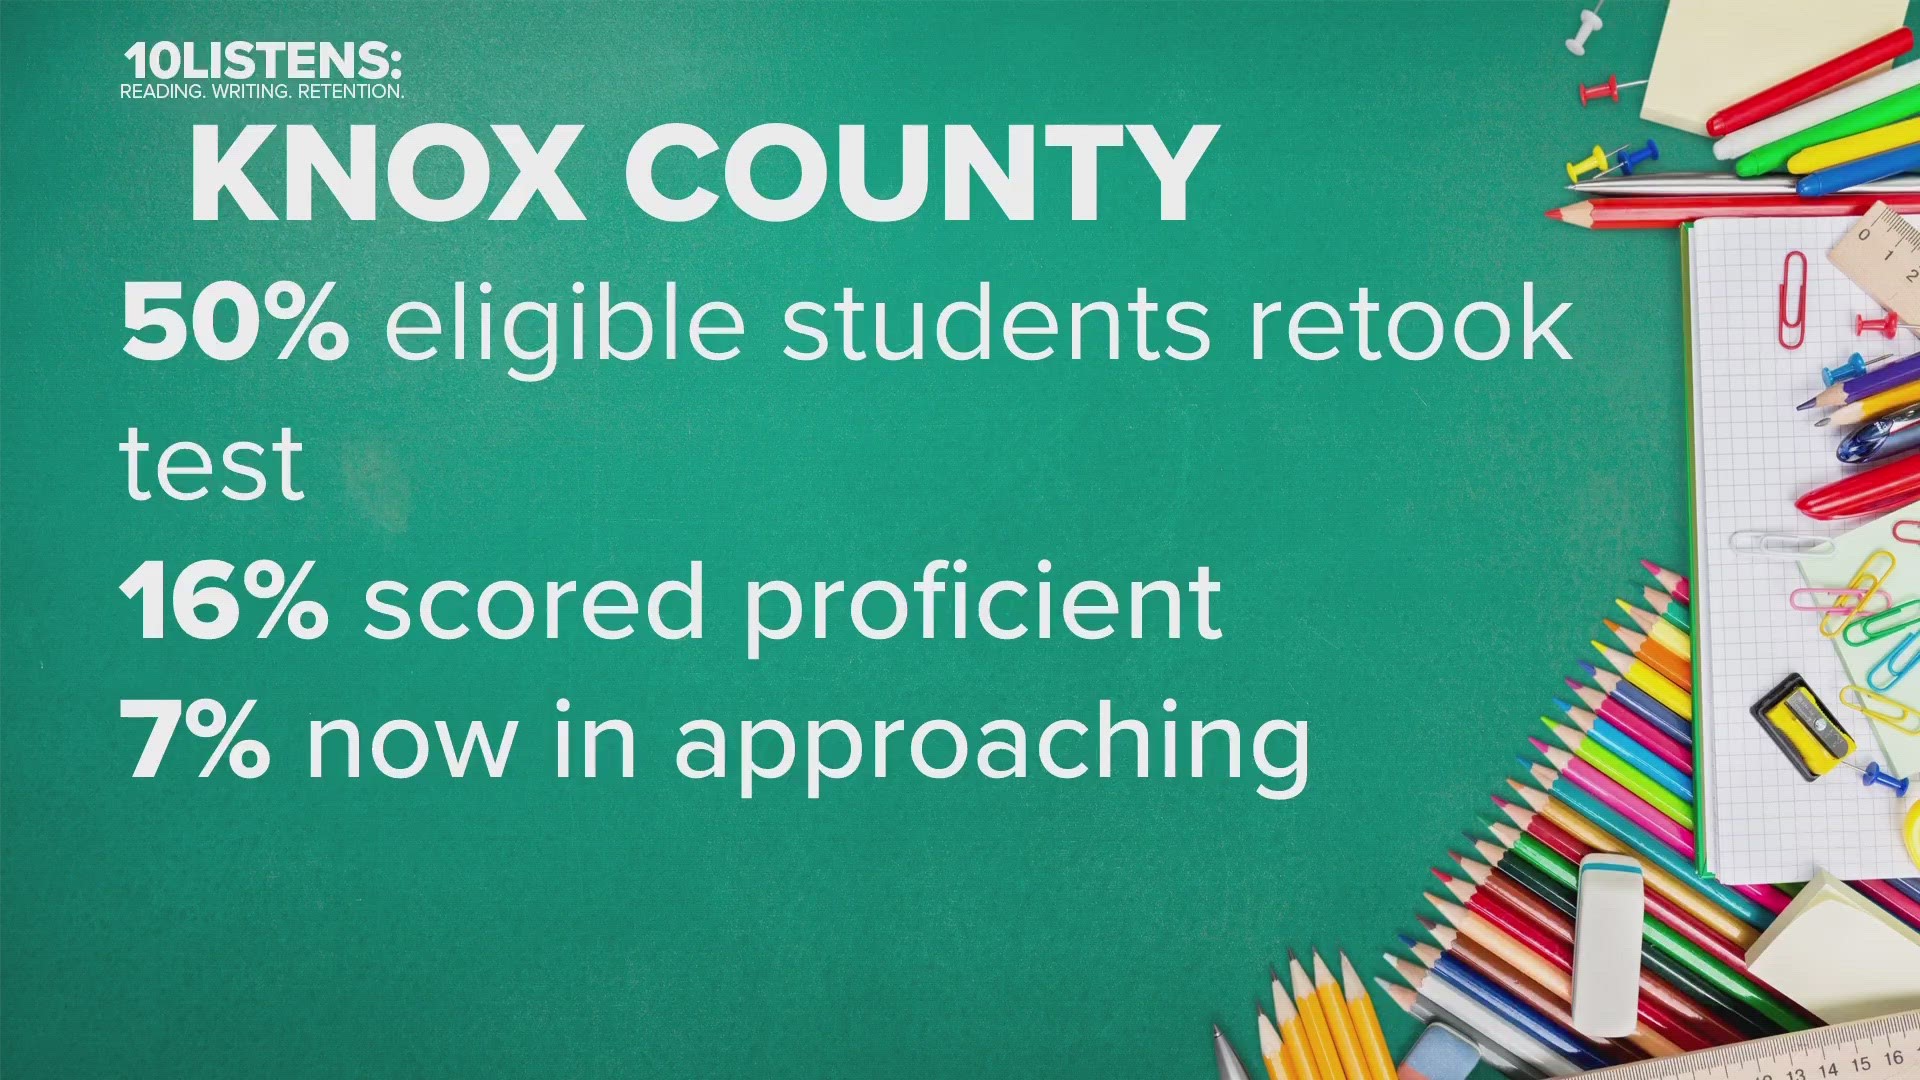 According to data from the state, around 52% of students who were eligible to retake the exam chose to do so.